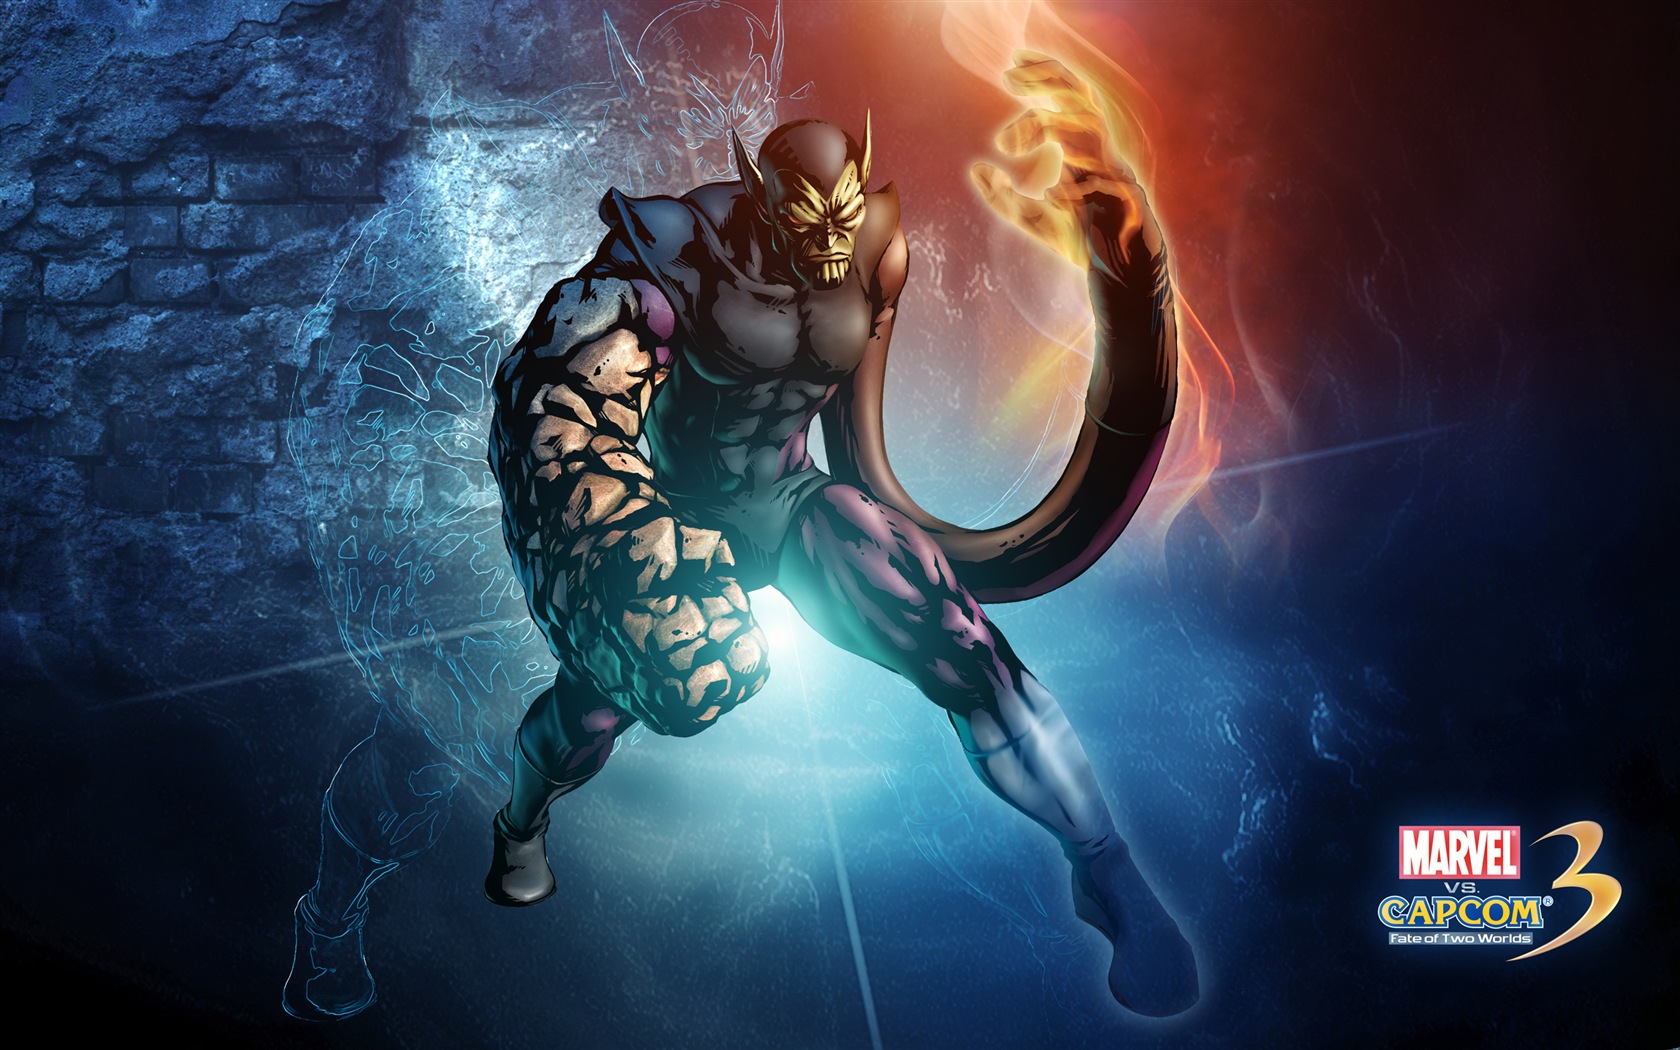 Marvel VS. Capcom 3: Fate of Two Worlds HD game wallpapers #24 - 1680x1050